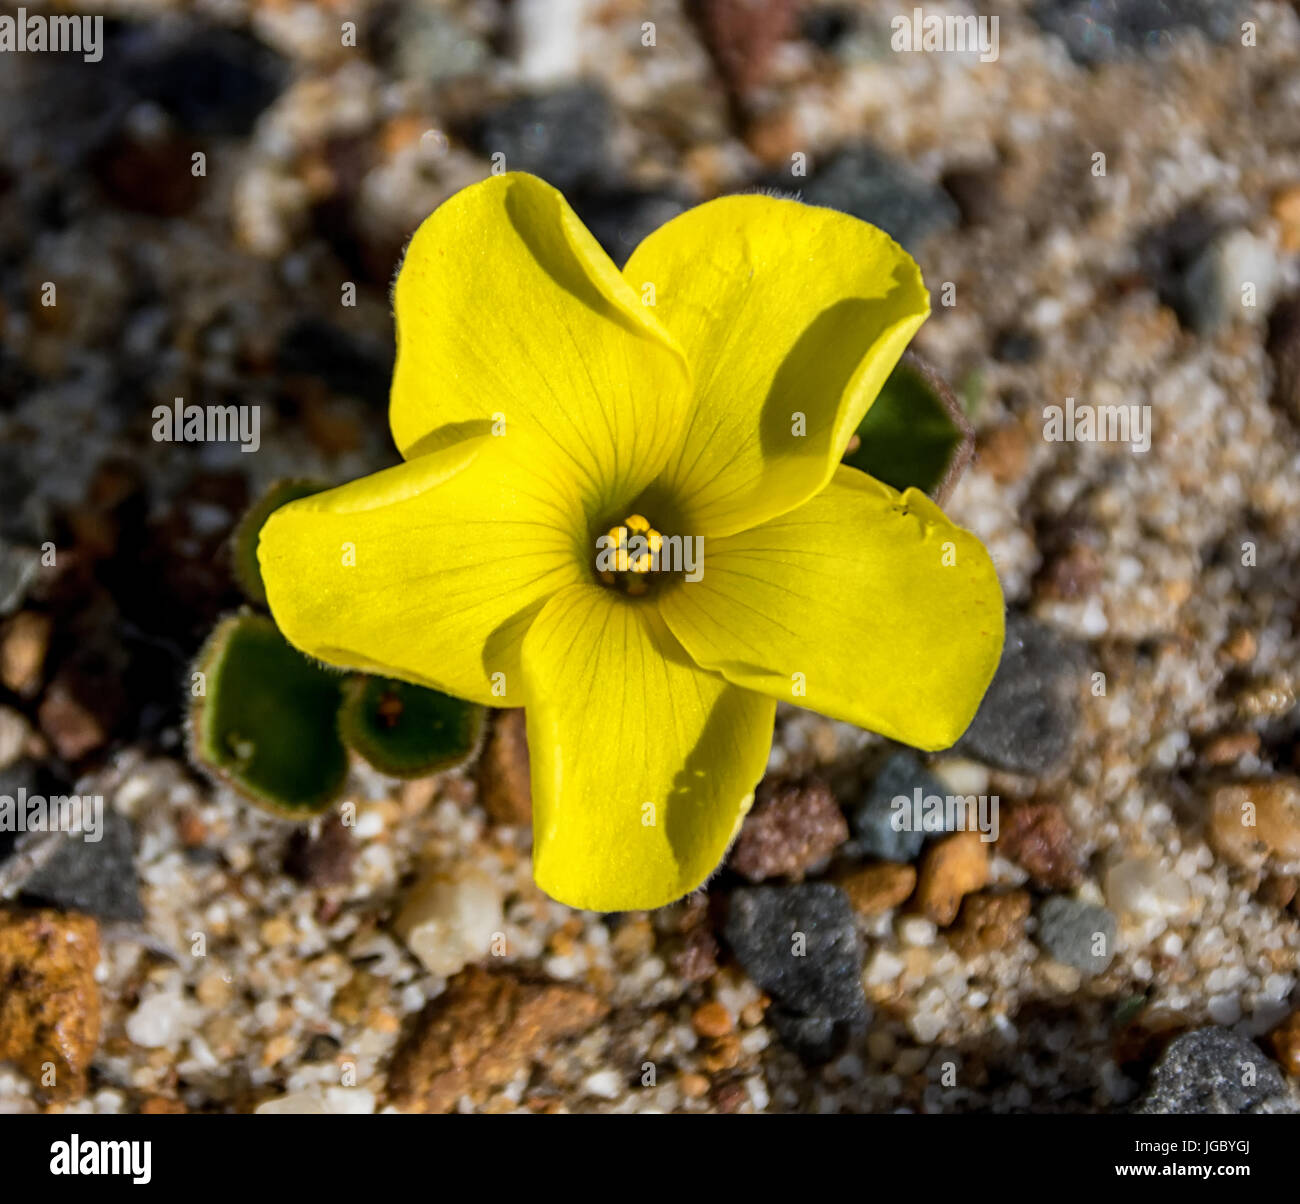 Oxalis luteola flower in the Southern Cape, South Africa Stock Photo